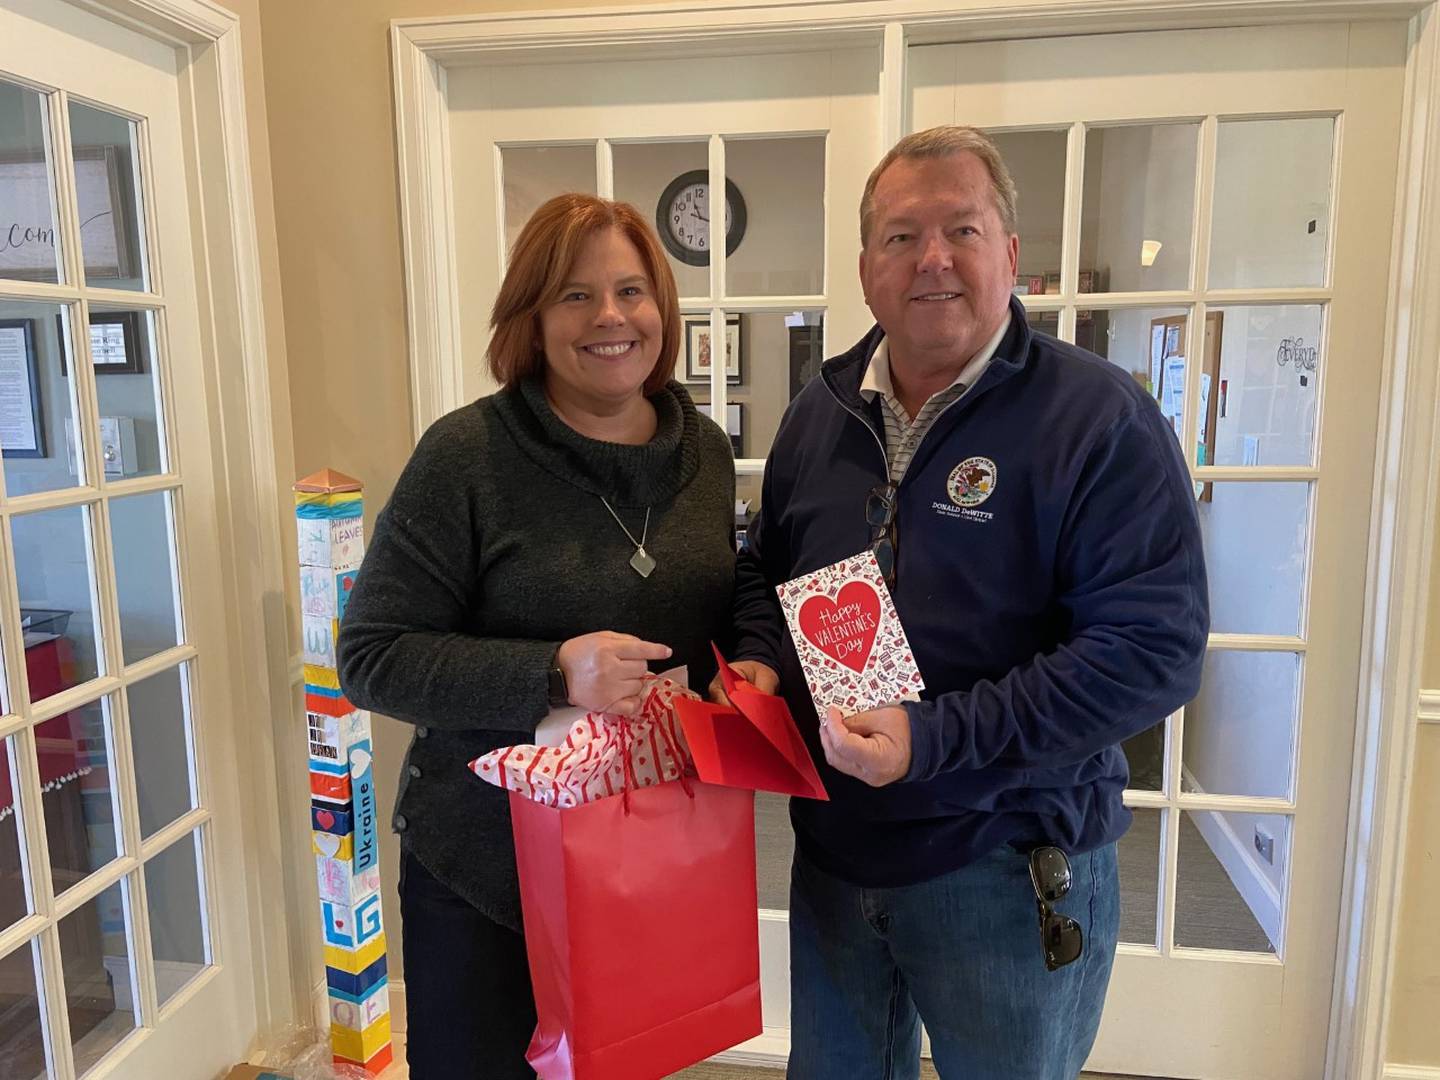 State Sen. Don DeWitte delivers valentines to area nursing homes, assisted and memory care centers and long-term care facilities as part of the Illinois Senate Republican Caucus’ third annual Valentines for Seniors program. DeWitte visited 19 facilities as part of the program.